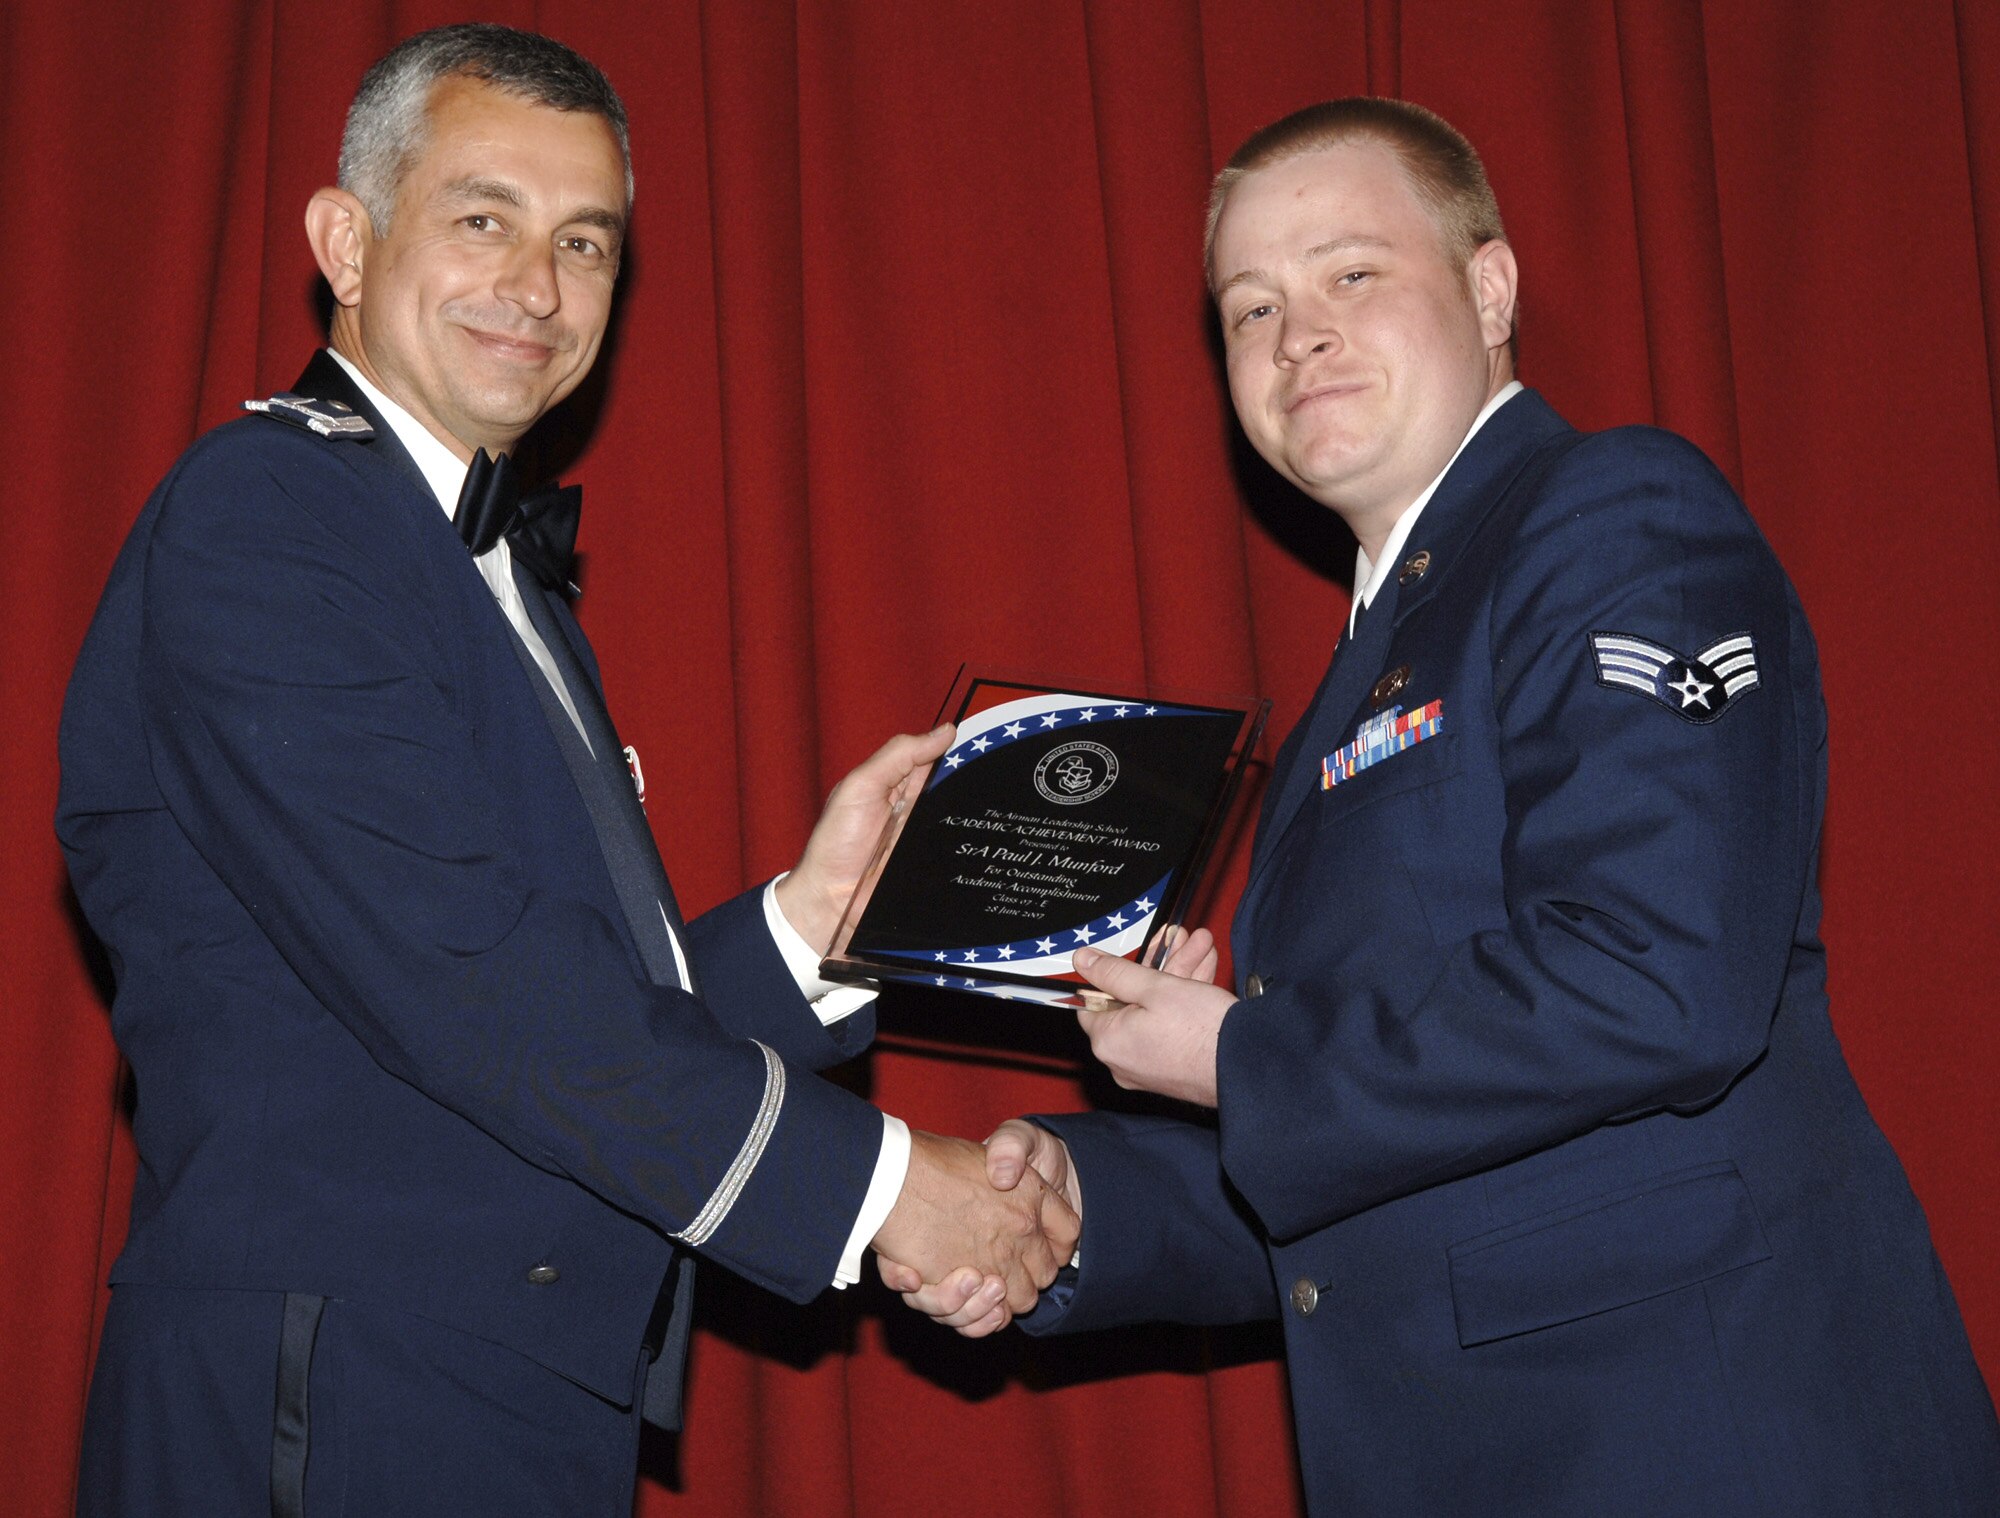 FAIRCHILD AIR FORCE BASE, Wash. -- Col. Roger Watkins, 92nd Air Refueling Wing vice commander, presents Senior Airman Paul Munford with the Airmen Leadership School Academic Achievement Award during the ALS graduation June 28. Airman Munford was also the recipient of a Distinguished Graduate Award. (U.S. Air Force photo/Airman 1st Class Nancy Hooks)